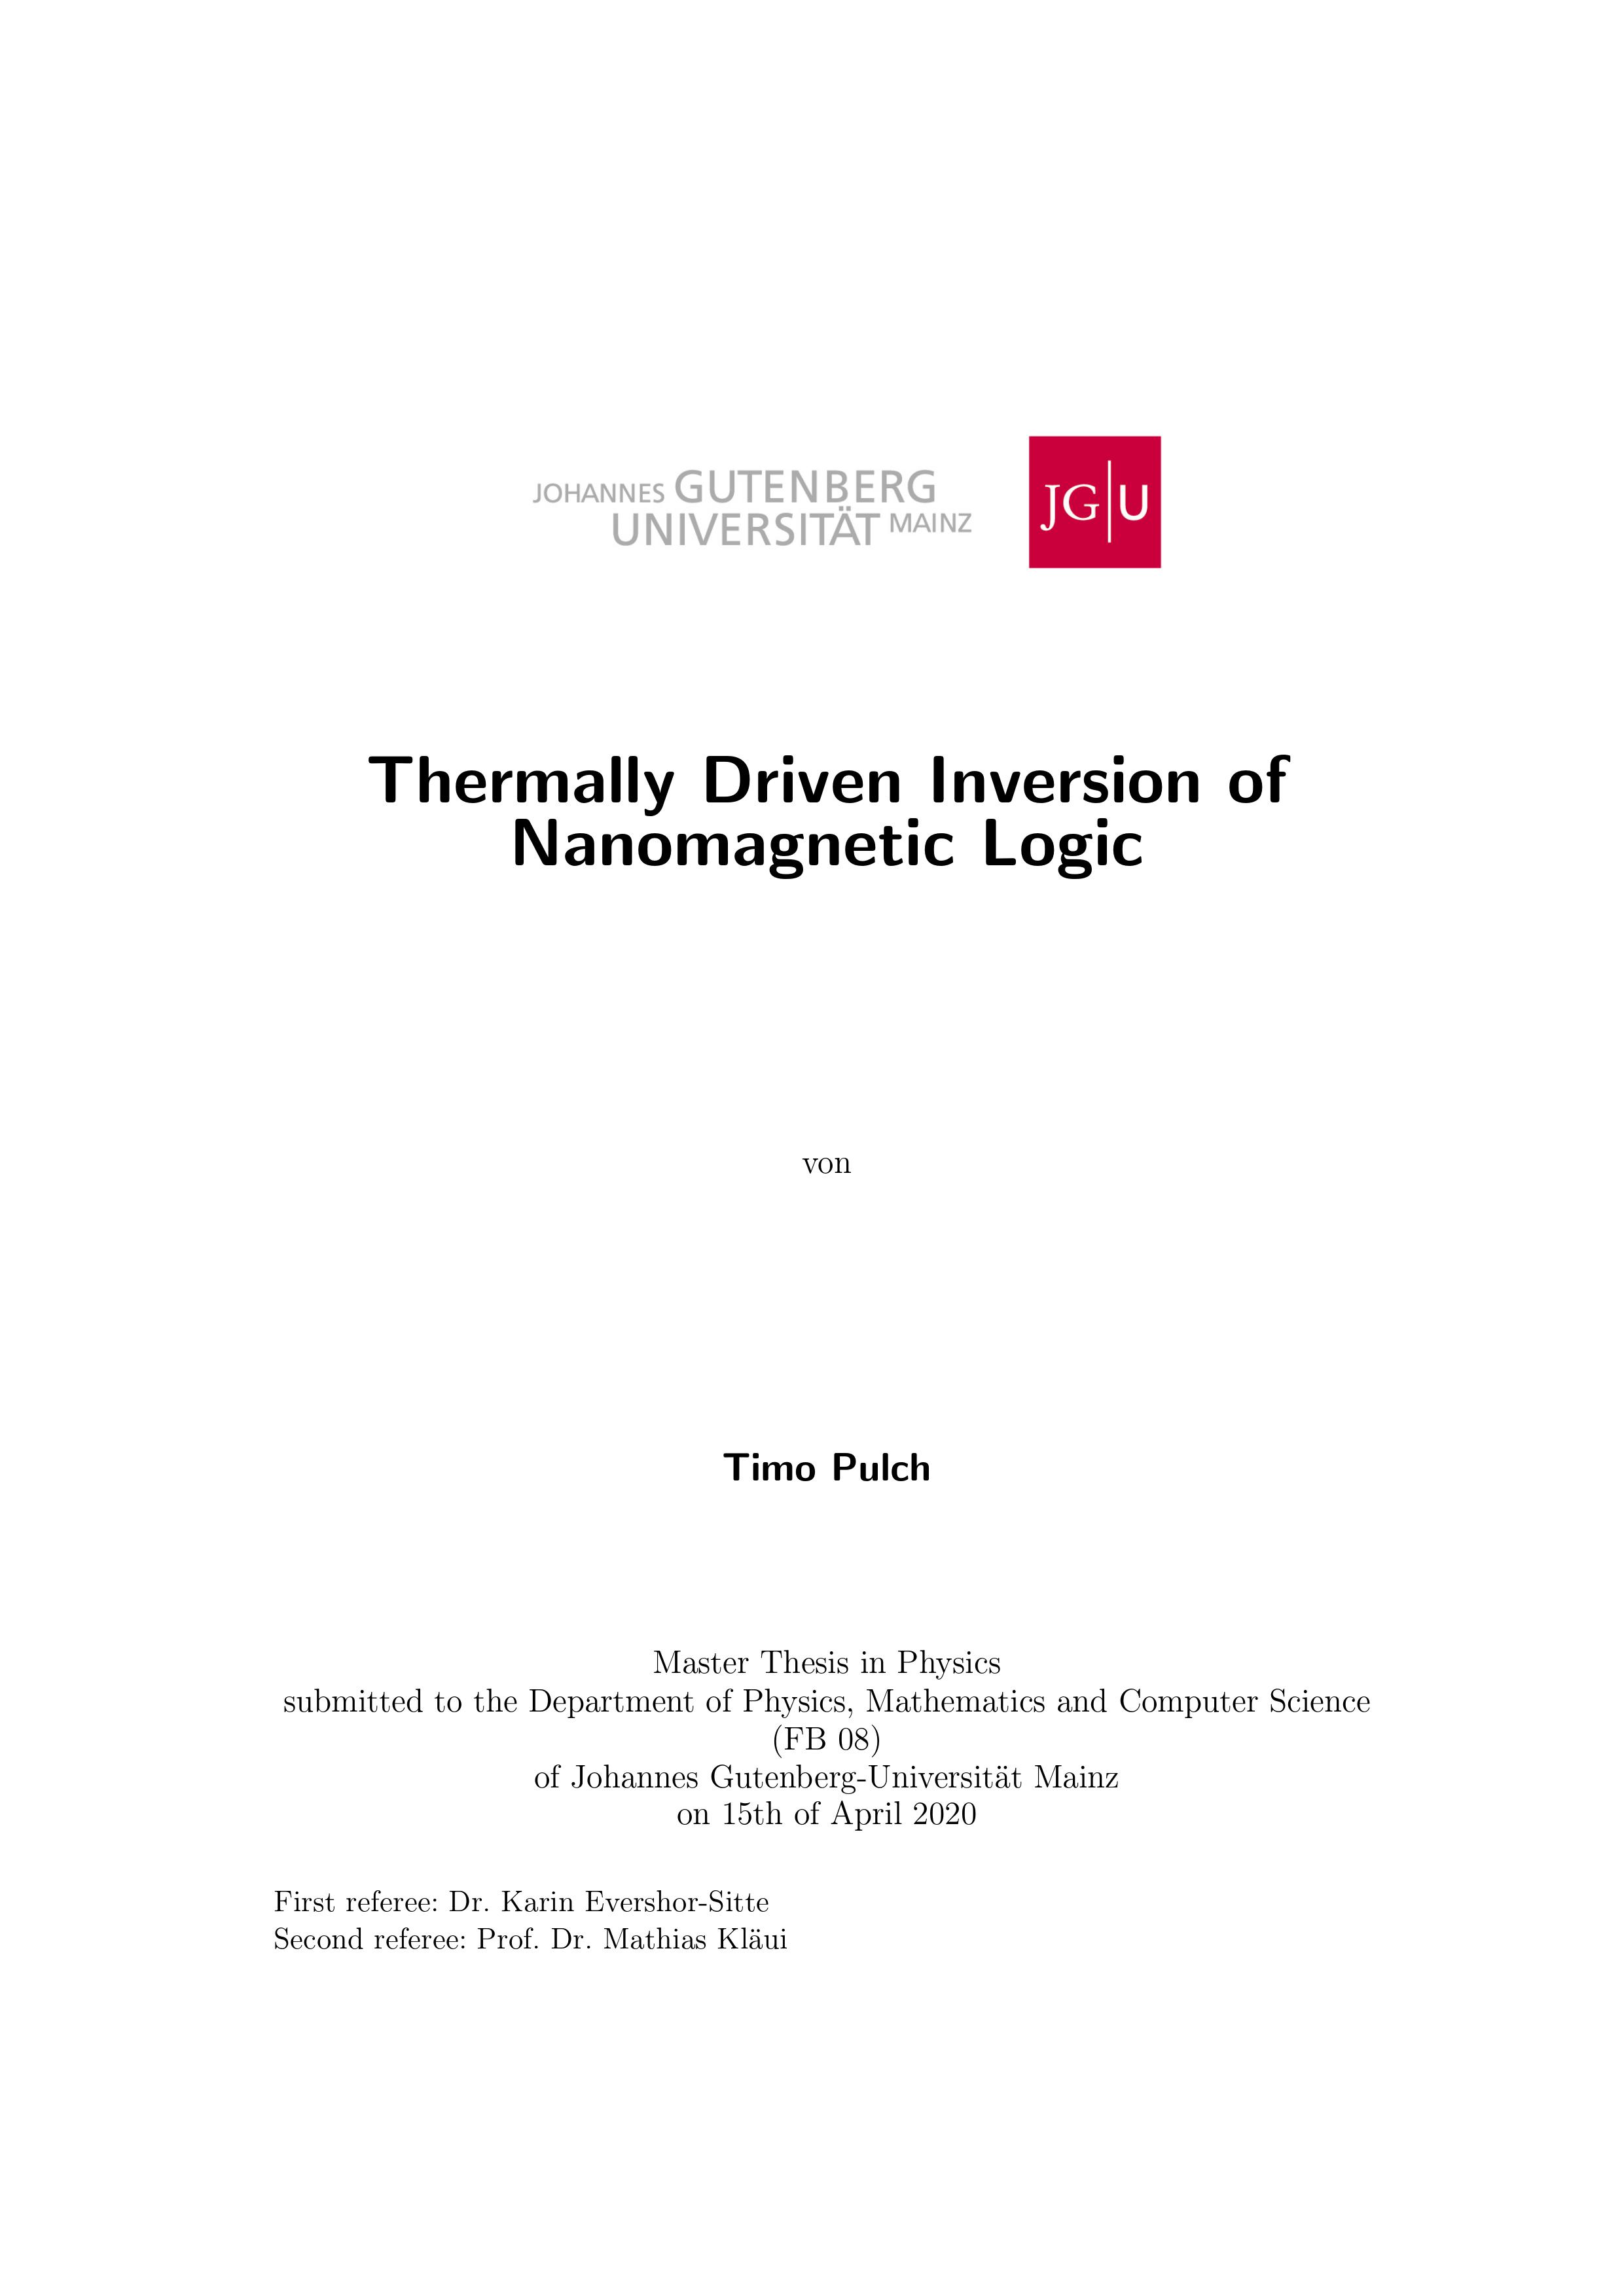 Master thesis Timo Pulch